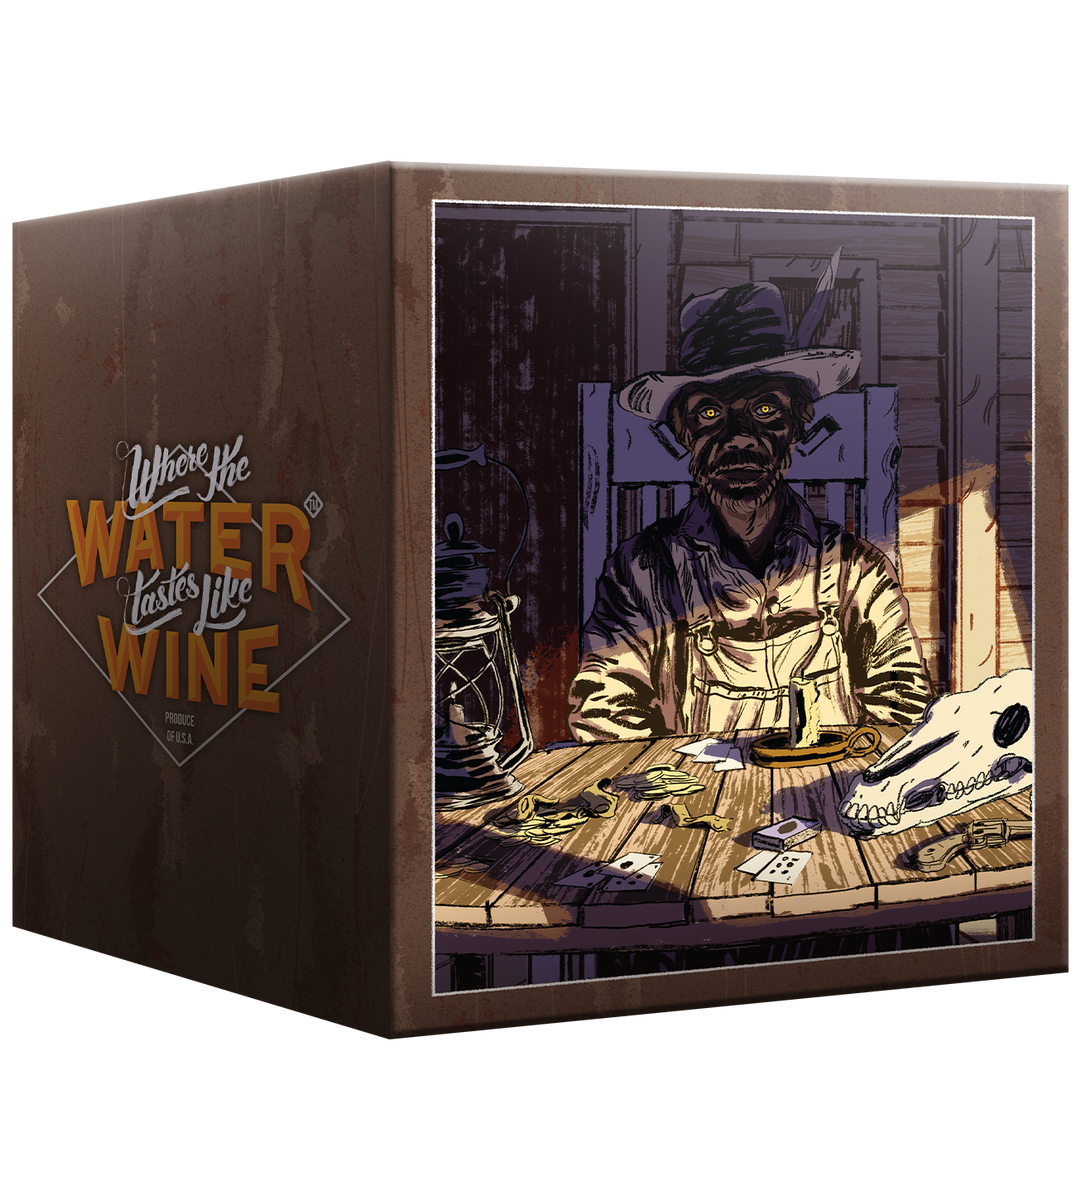 Where The Water Tastes Like Wine (PS4) – Limited Run Games